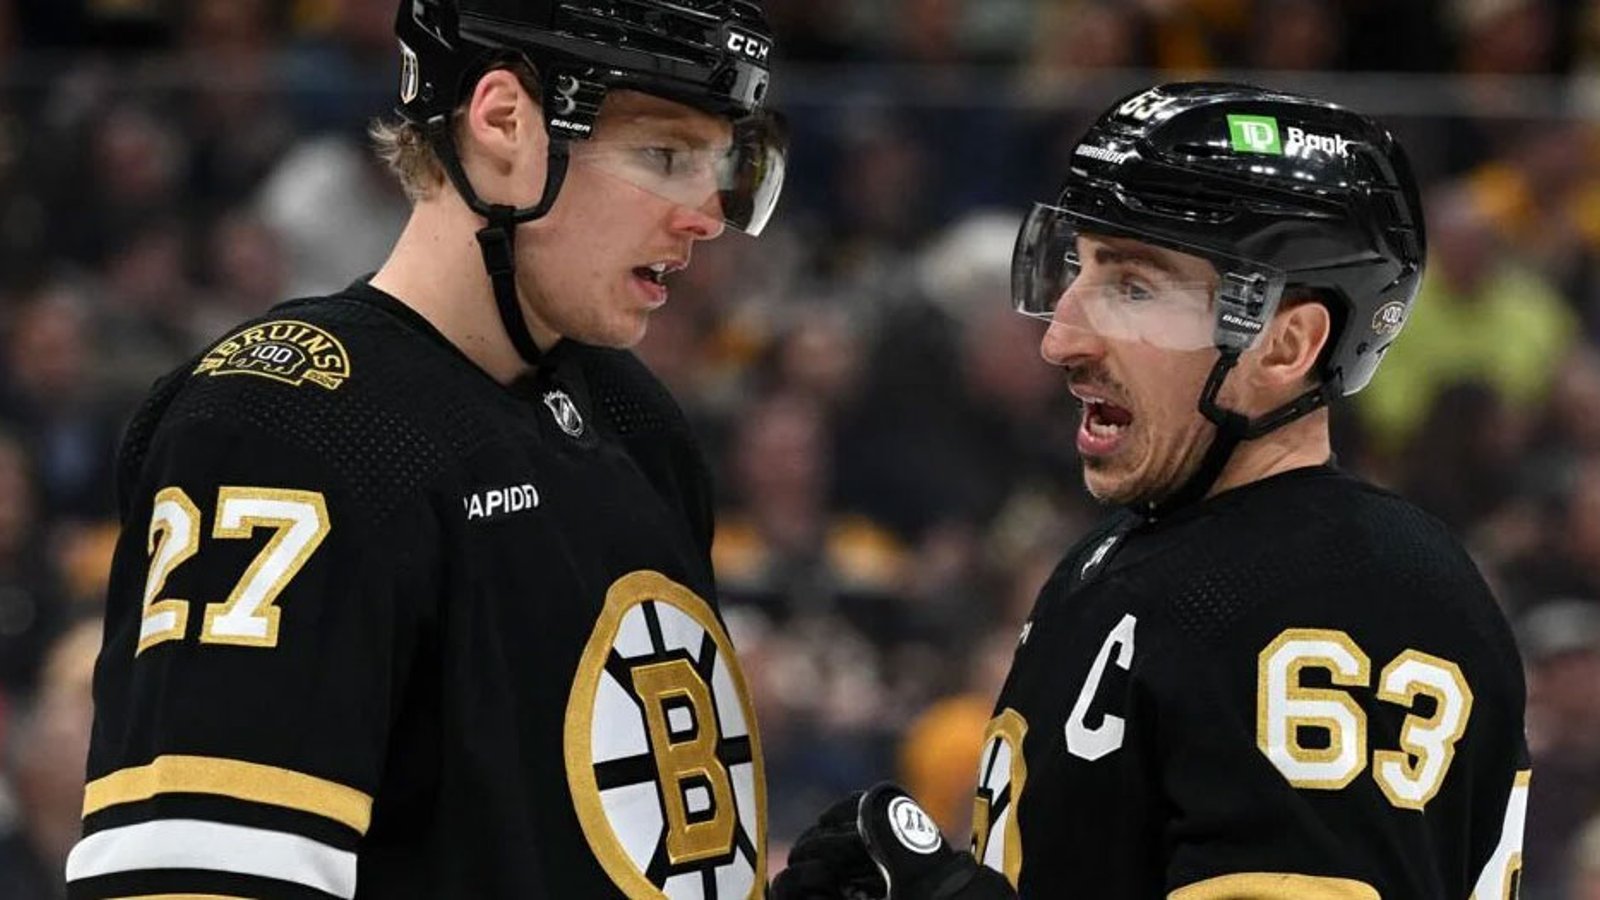 Marchand pumps Leafs' tires, says they're “built different than past years”